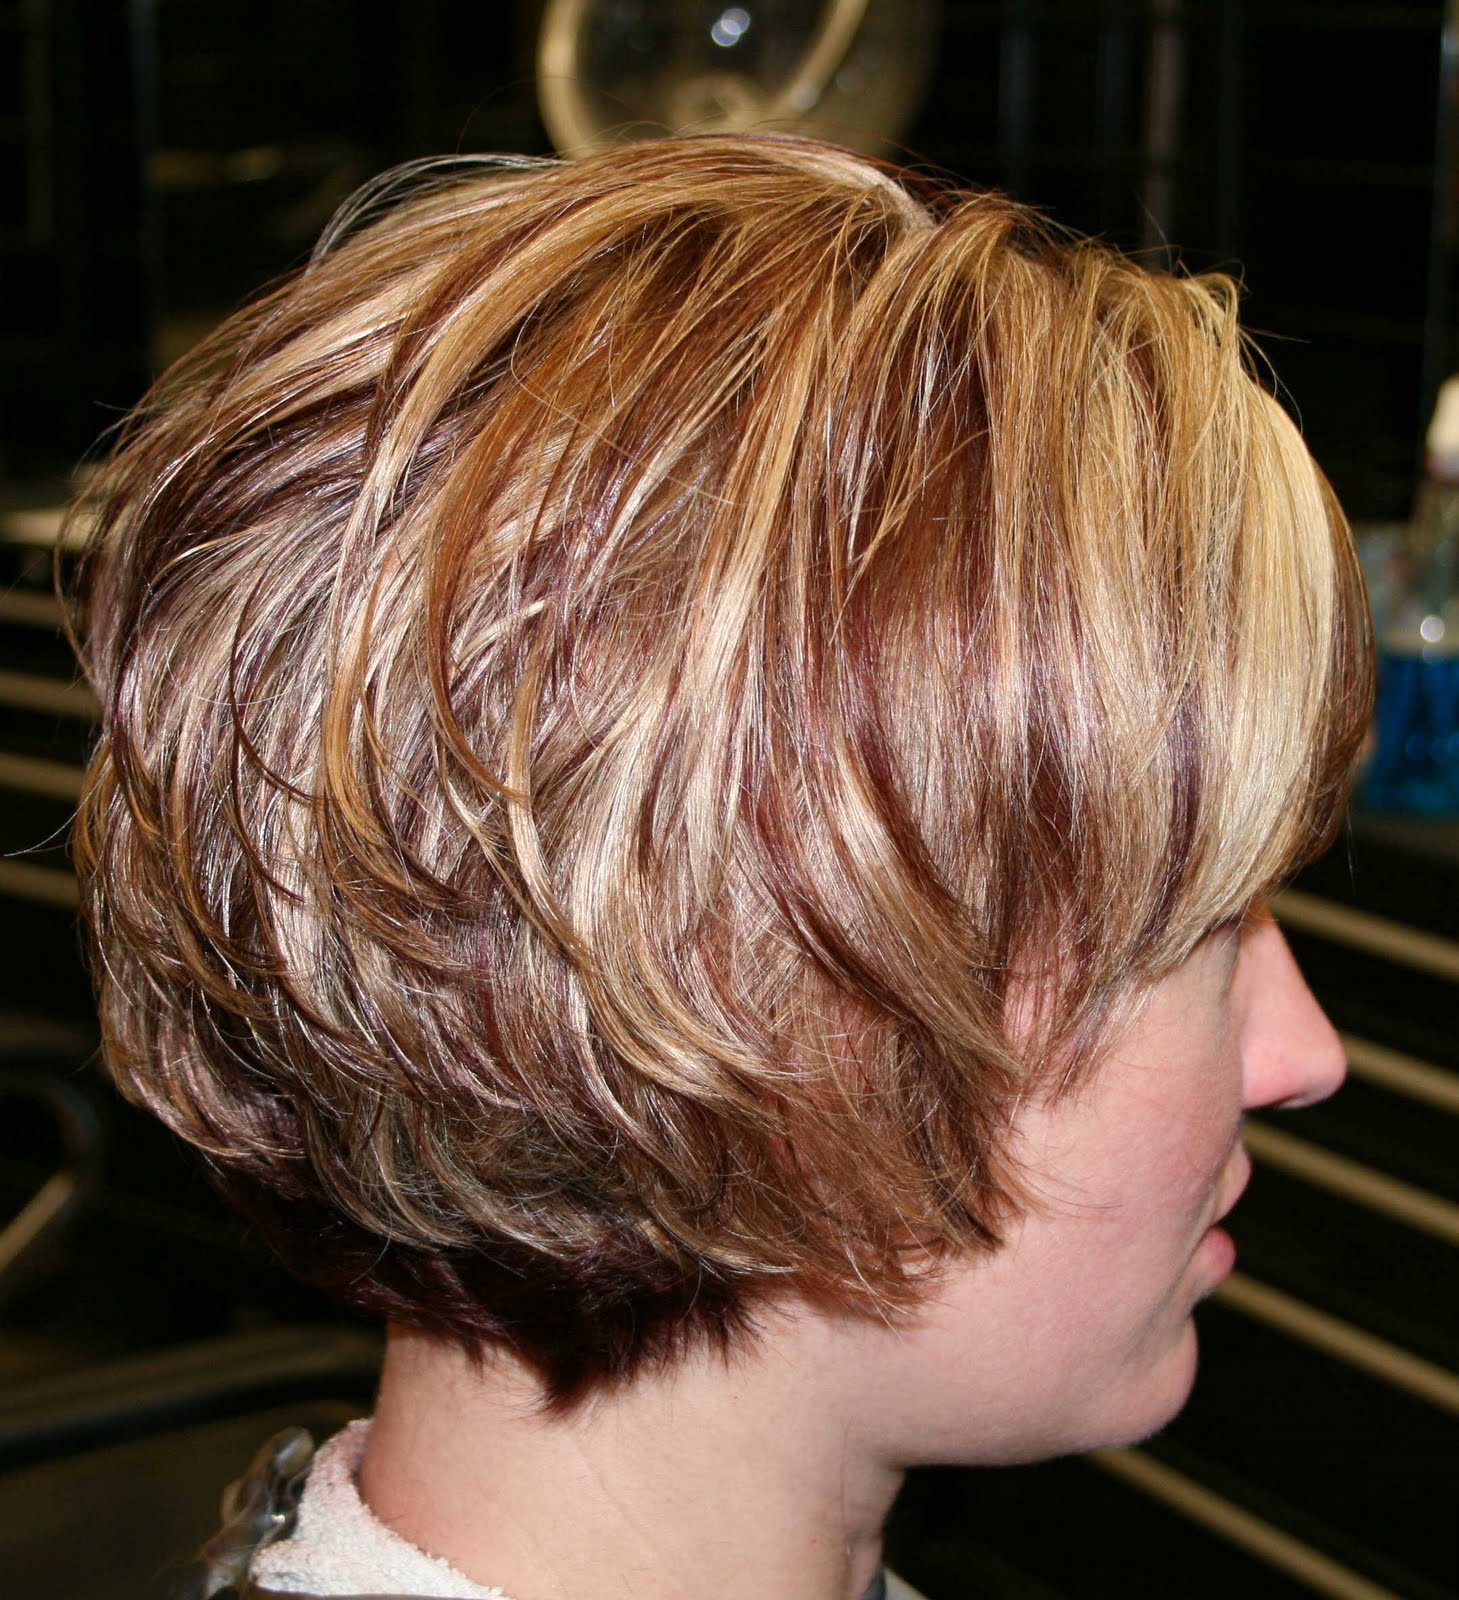 short hairstyles continue to be cutting edge fashion a short stacked ...